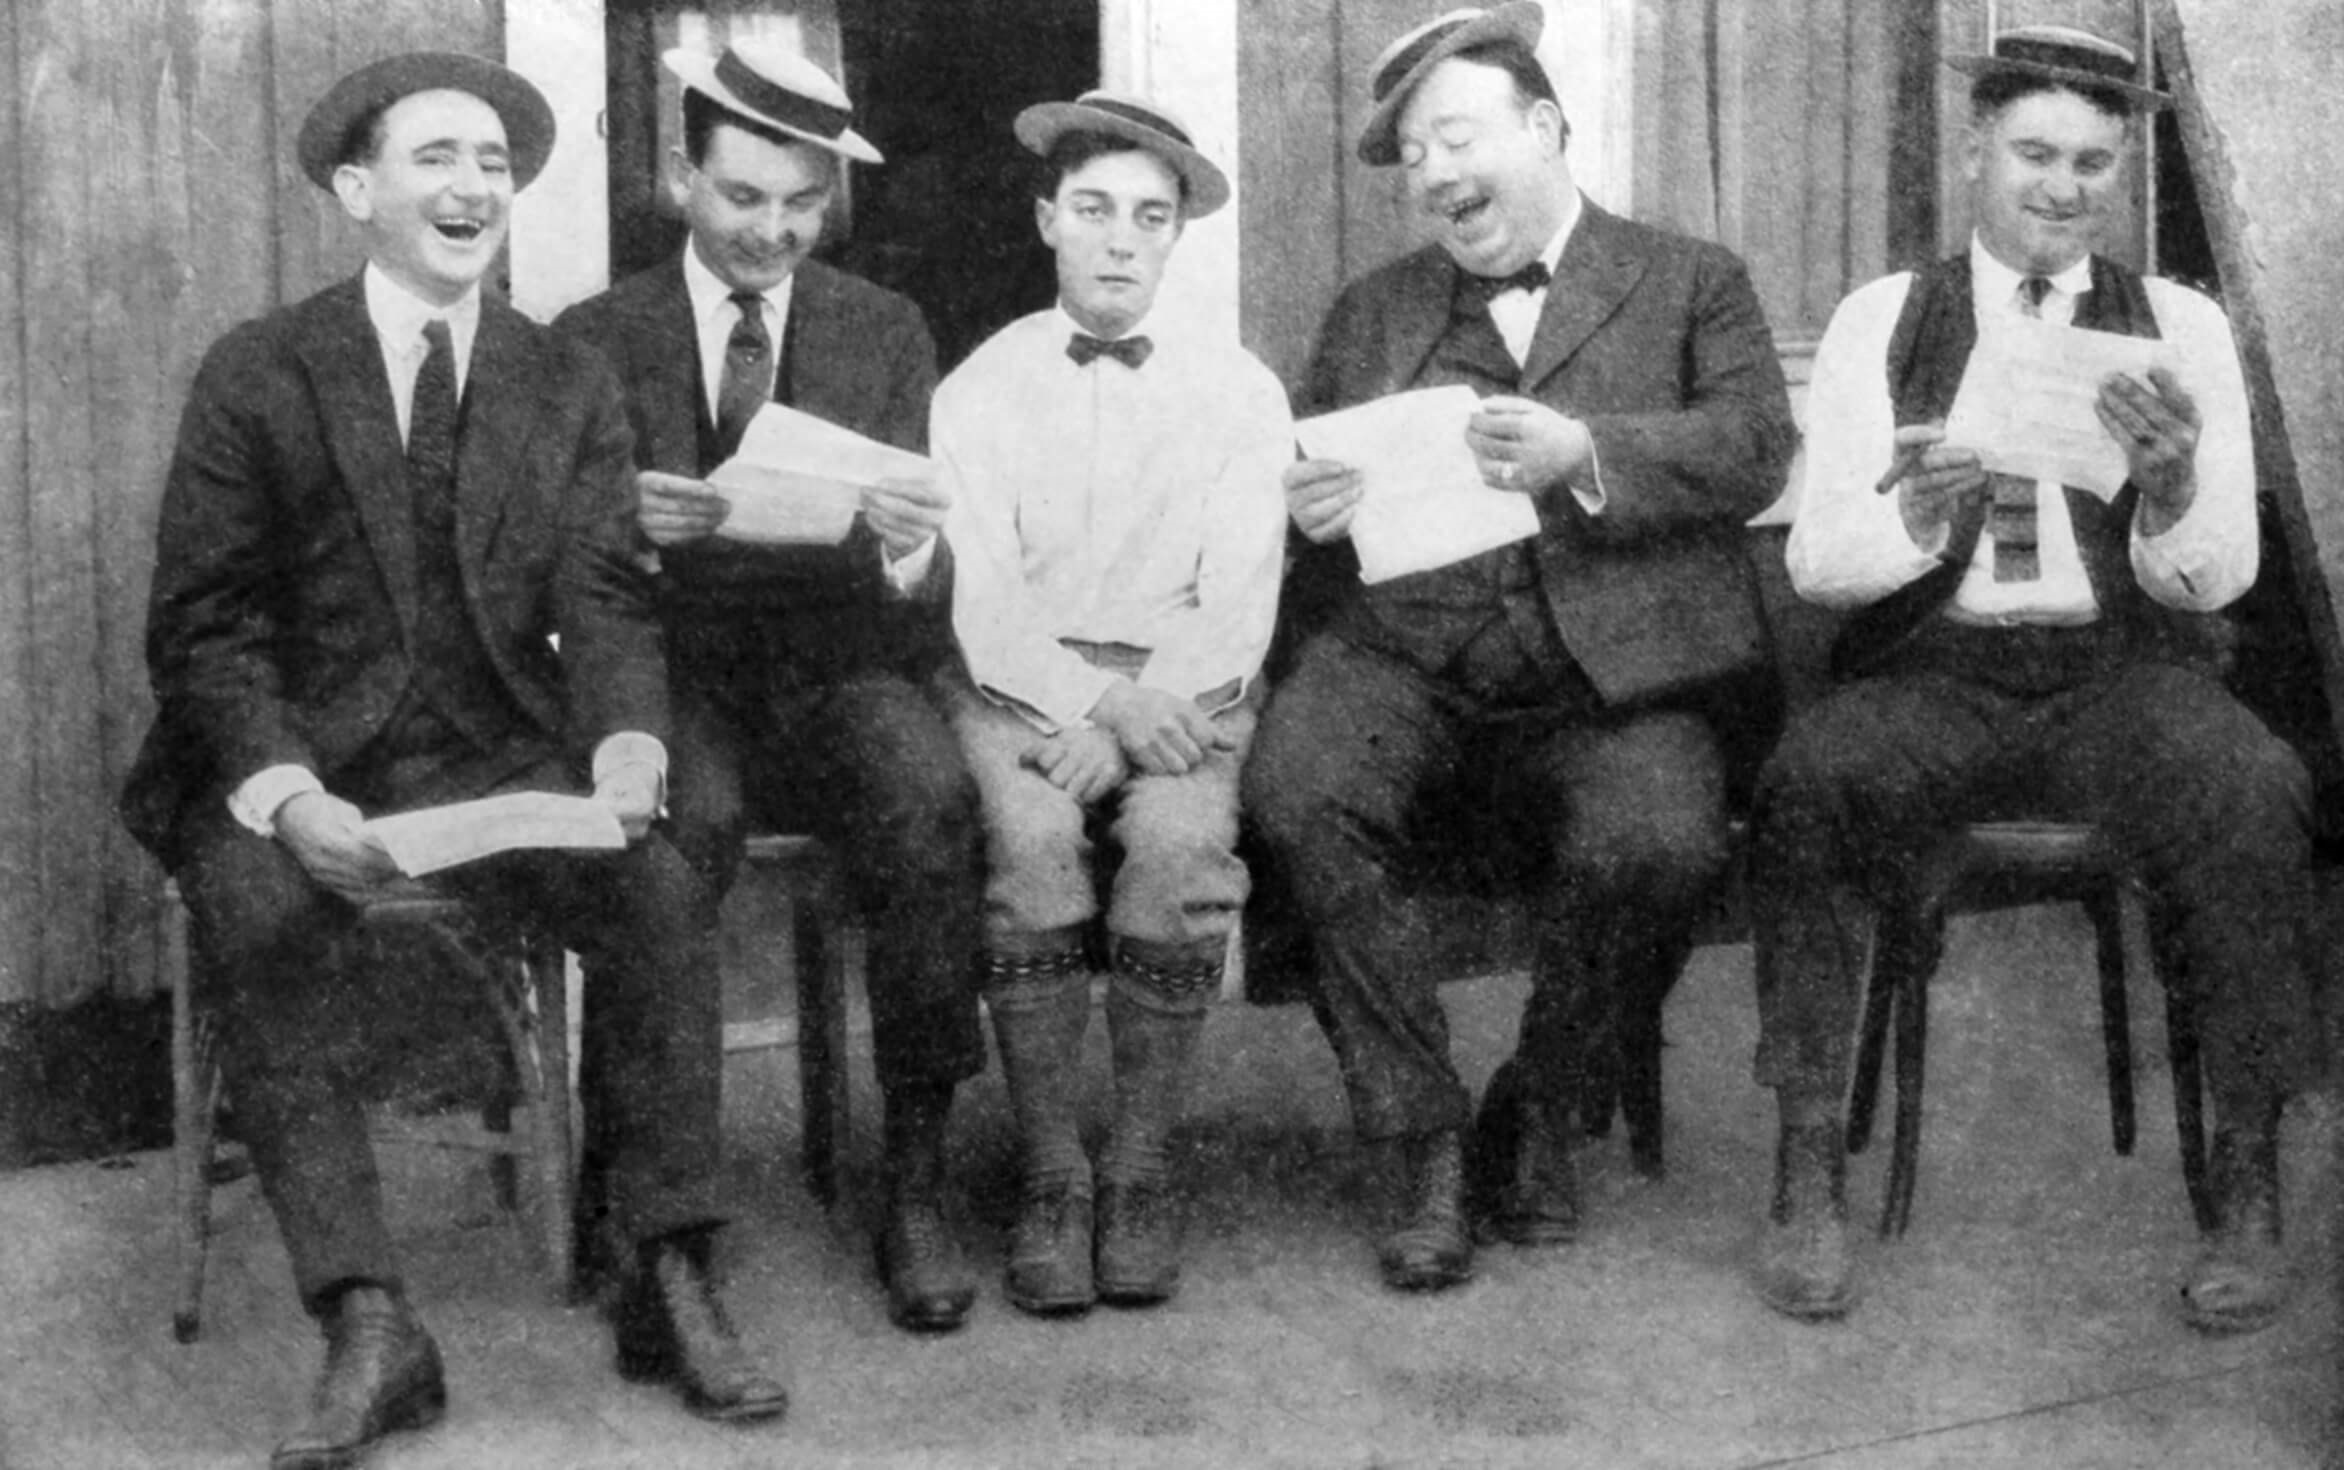 Buster Keaton with his writing staff, 1923 (Source: Wikimedia Commons)